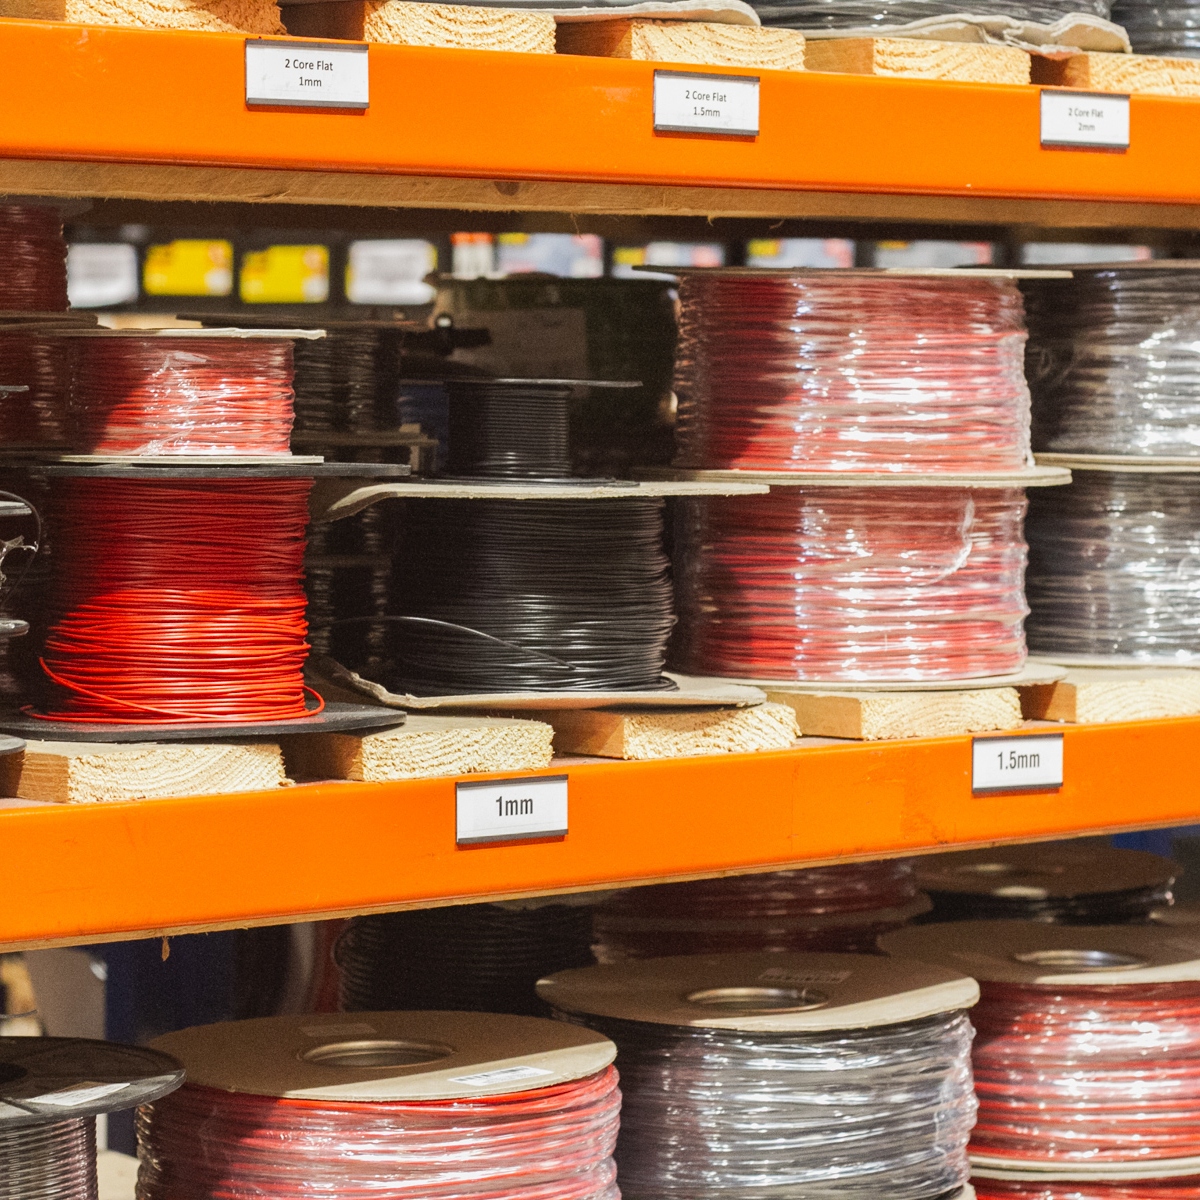 Spools of wire in various colors, including Black DC Power Cable, are neatly arranged on orange shelves in the hardware store, each labeled with different sizes and types.